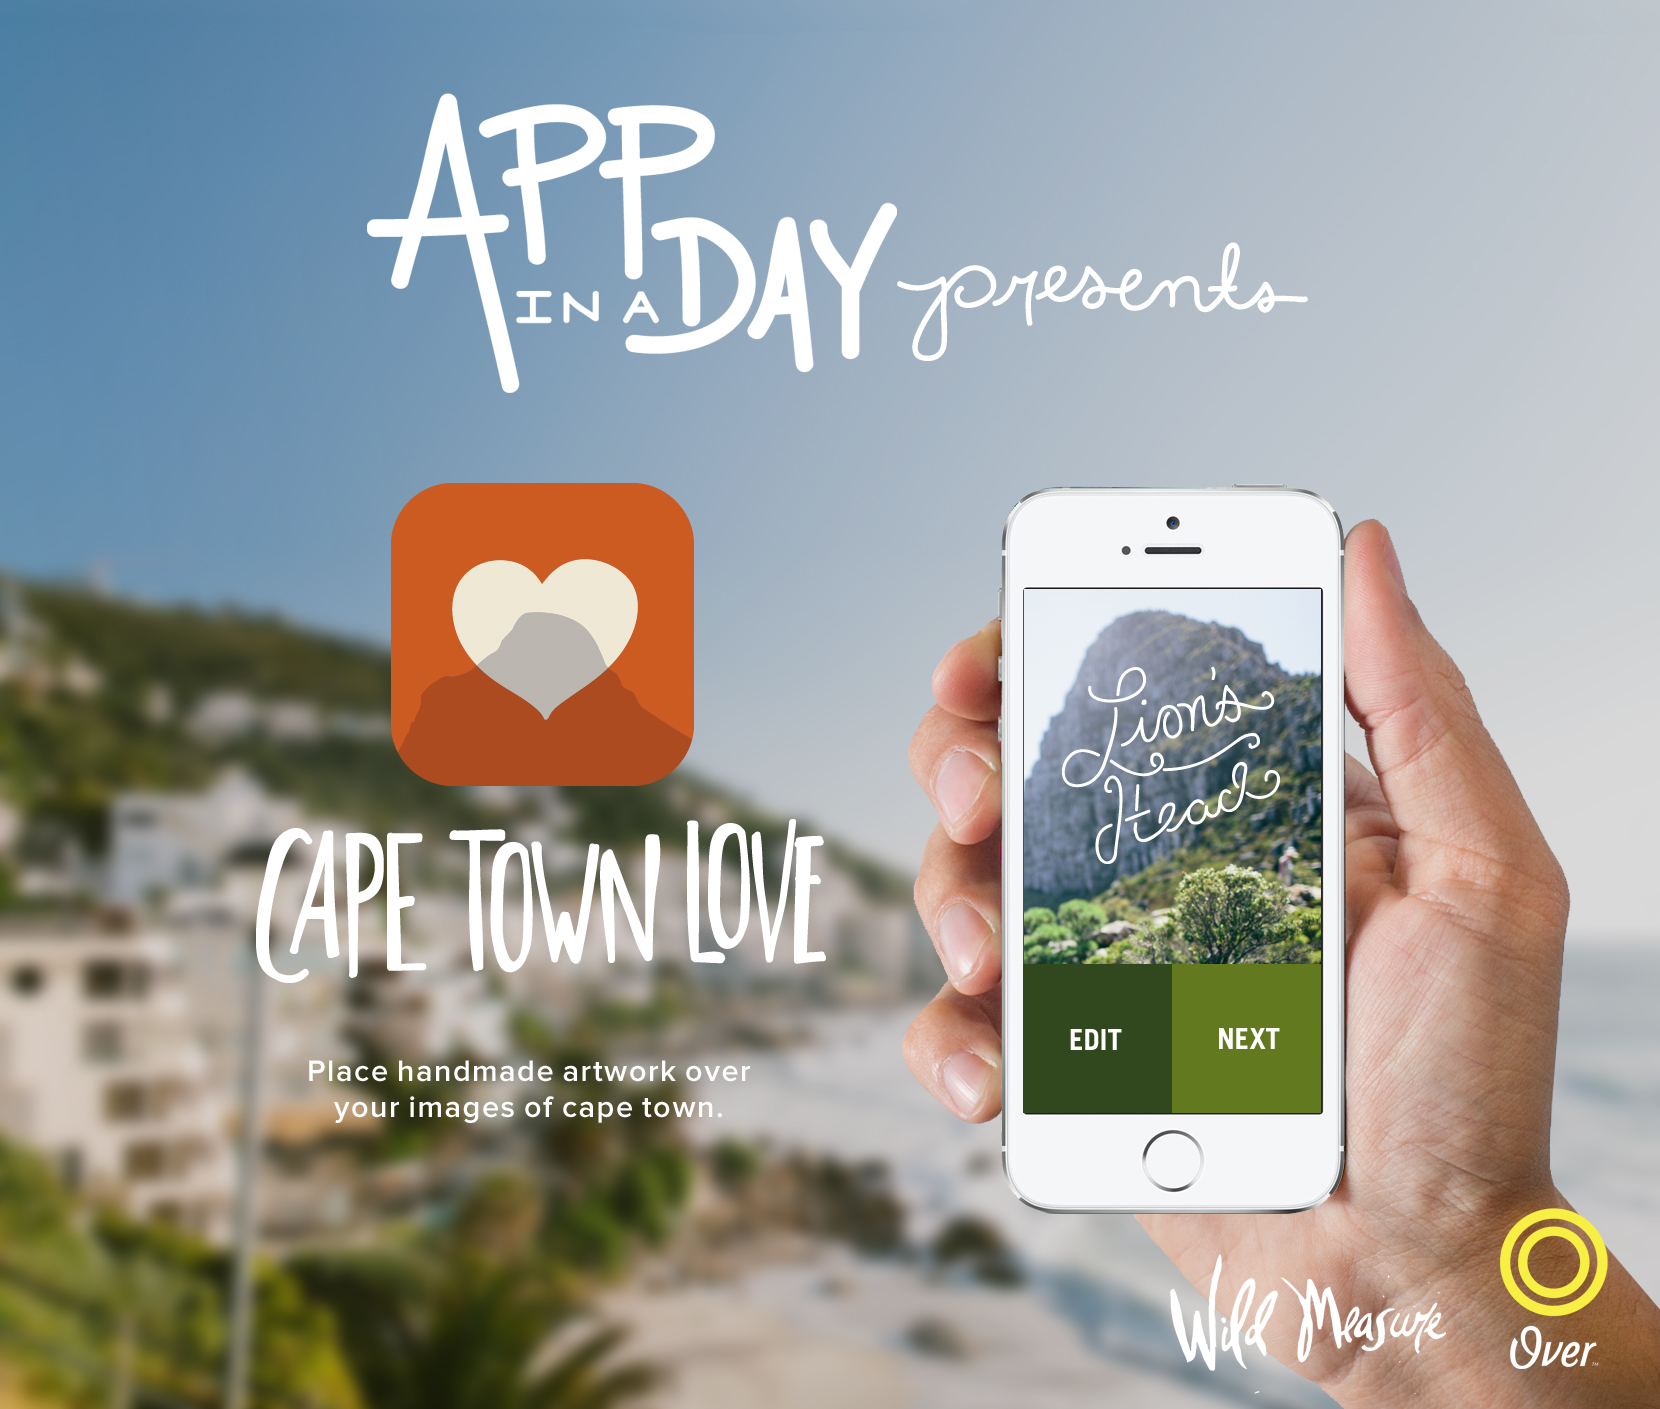 App in a Day: Presenting Cape Town Love